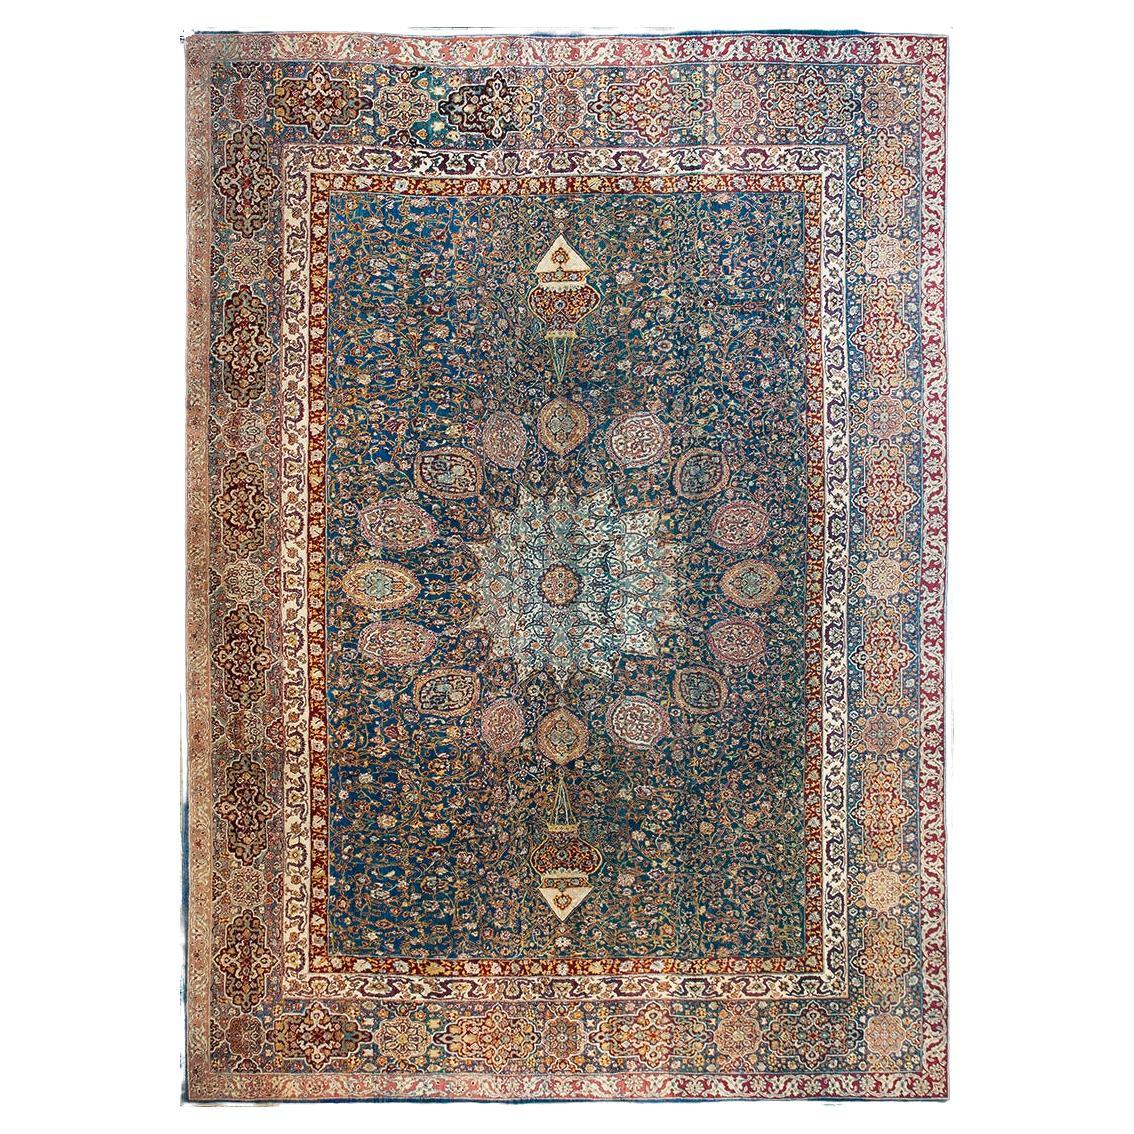 Late 19th Century N. Indian Agra Carpet ( 10'8" - 14'10" - 325 x 452 ) For Sale